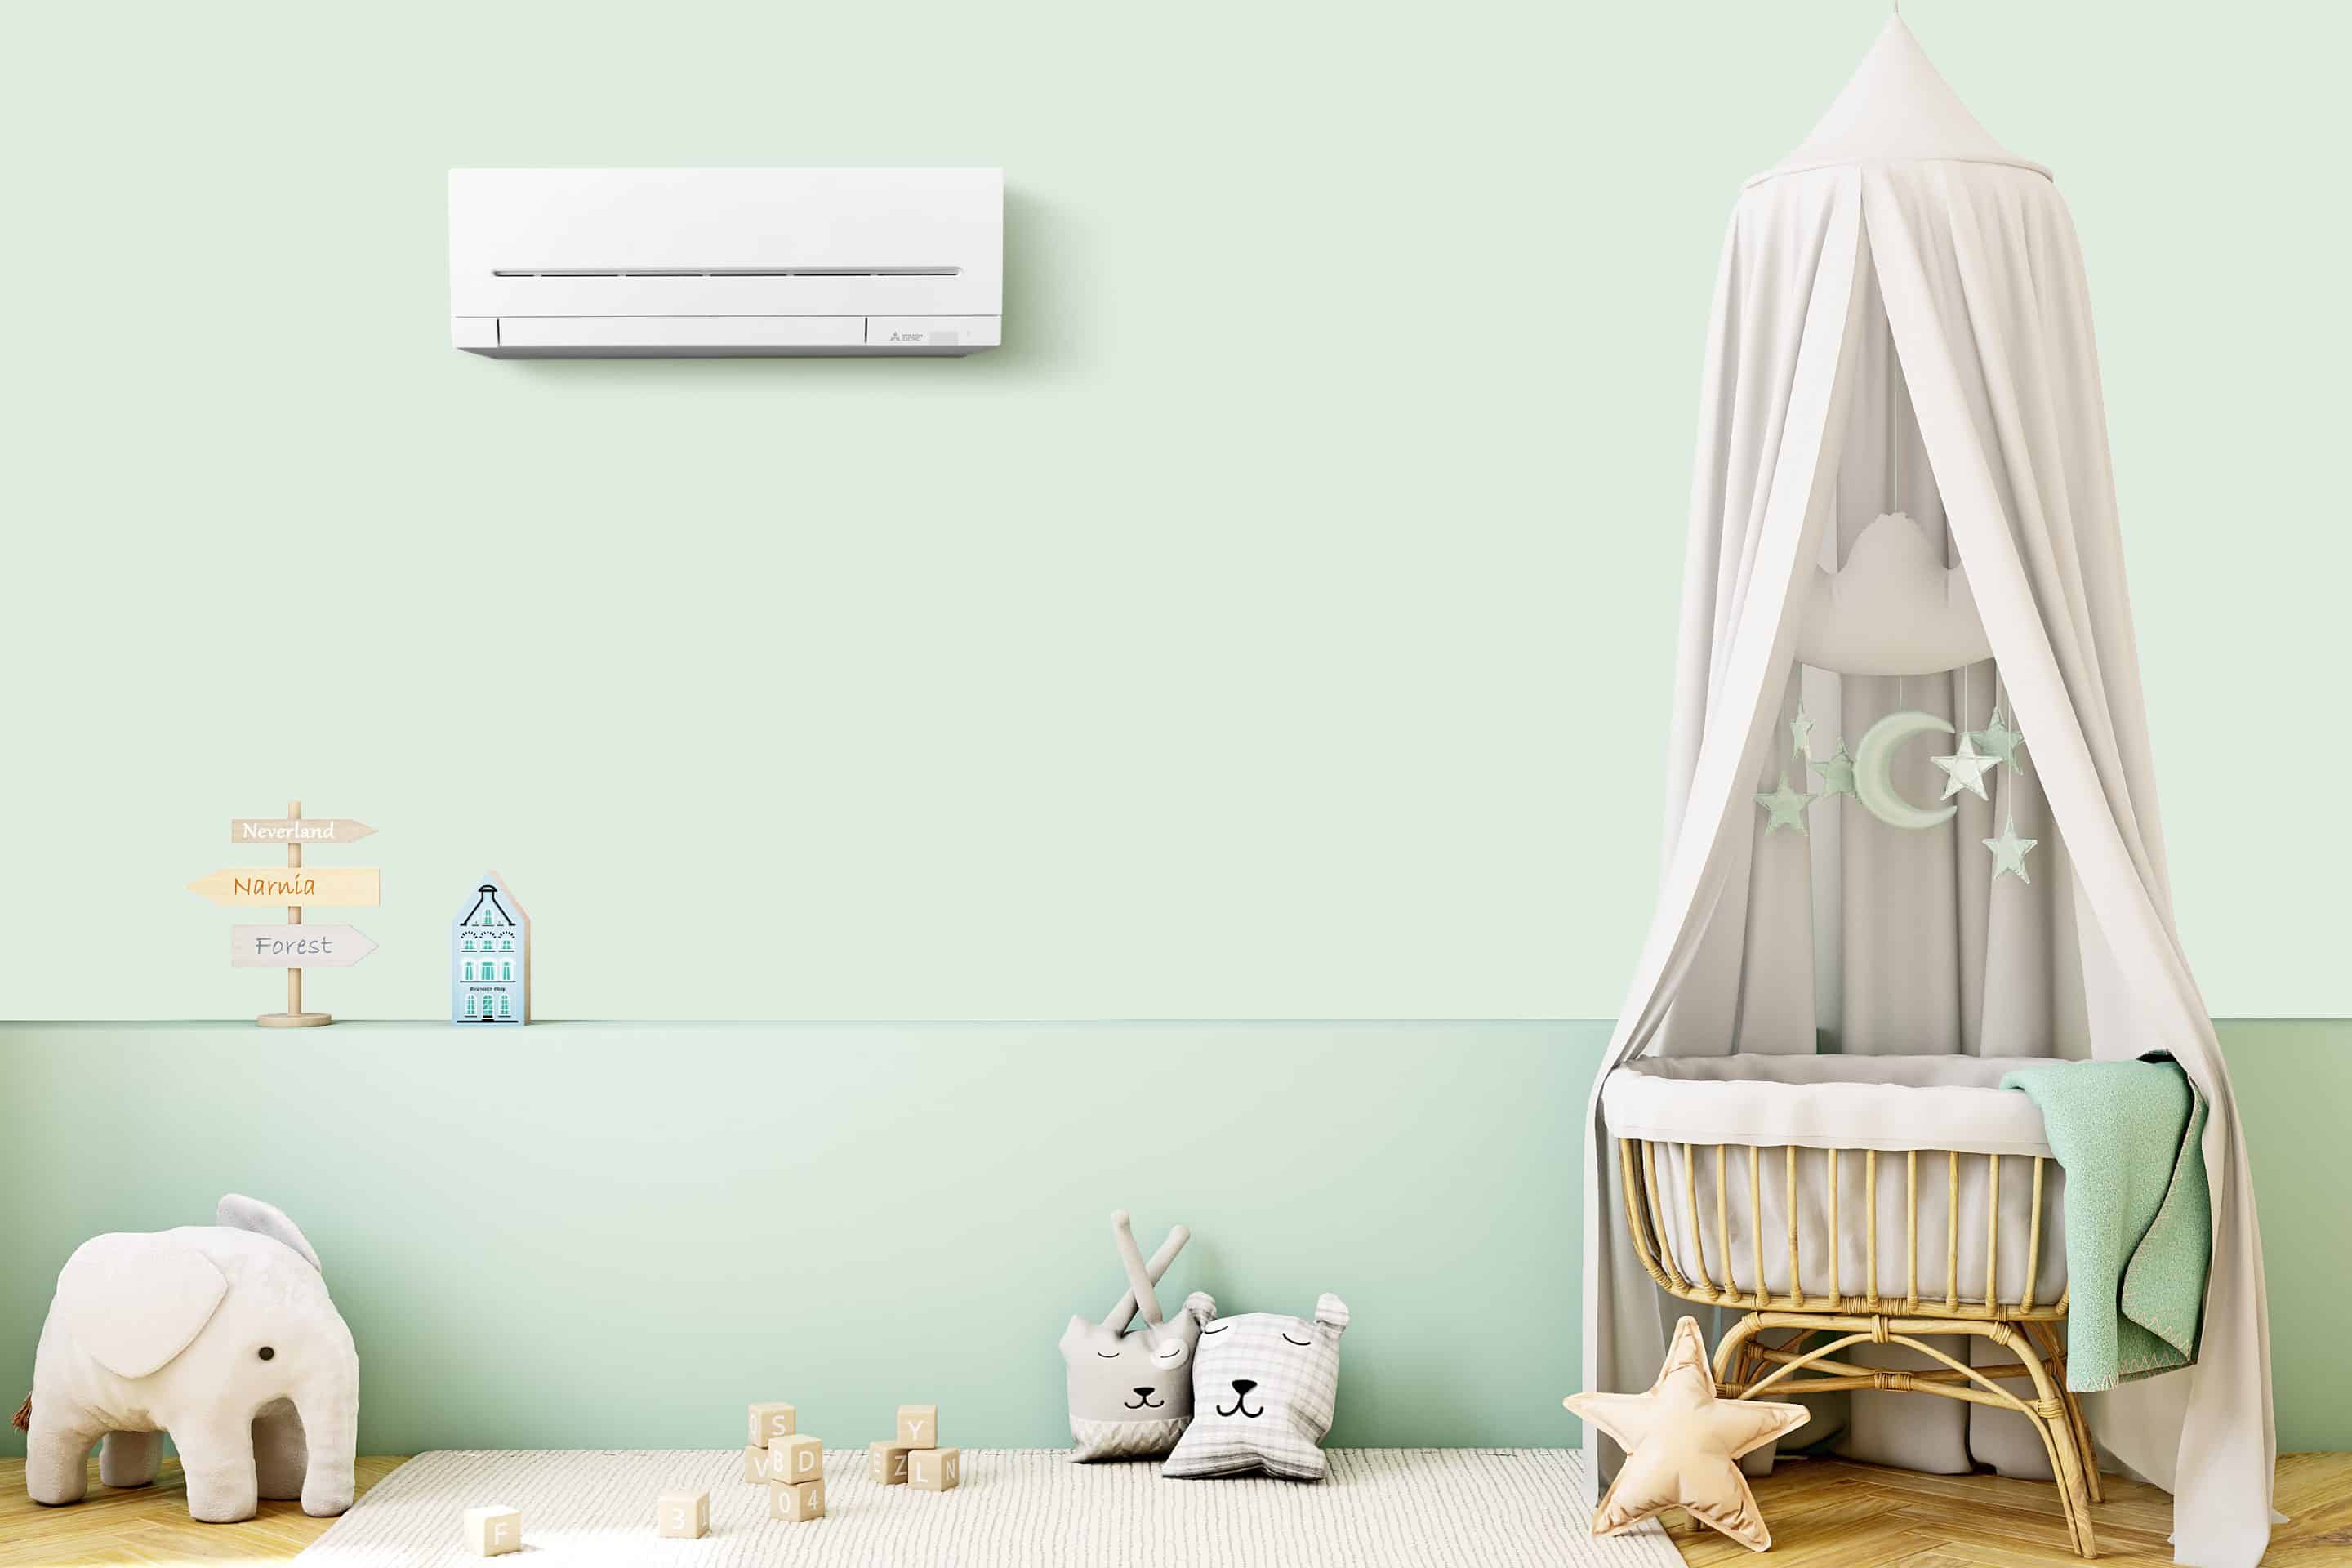 a mitsubshi electric heat pump displayed on the wall of a nursery